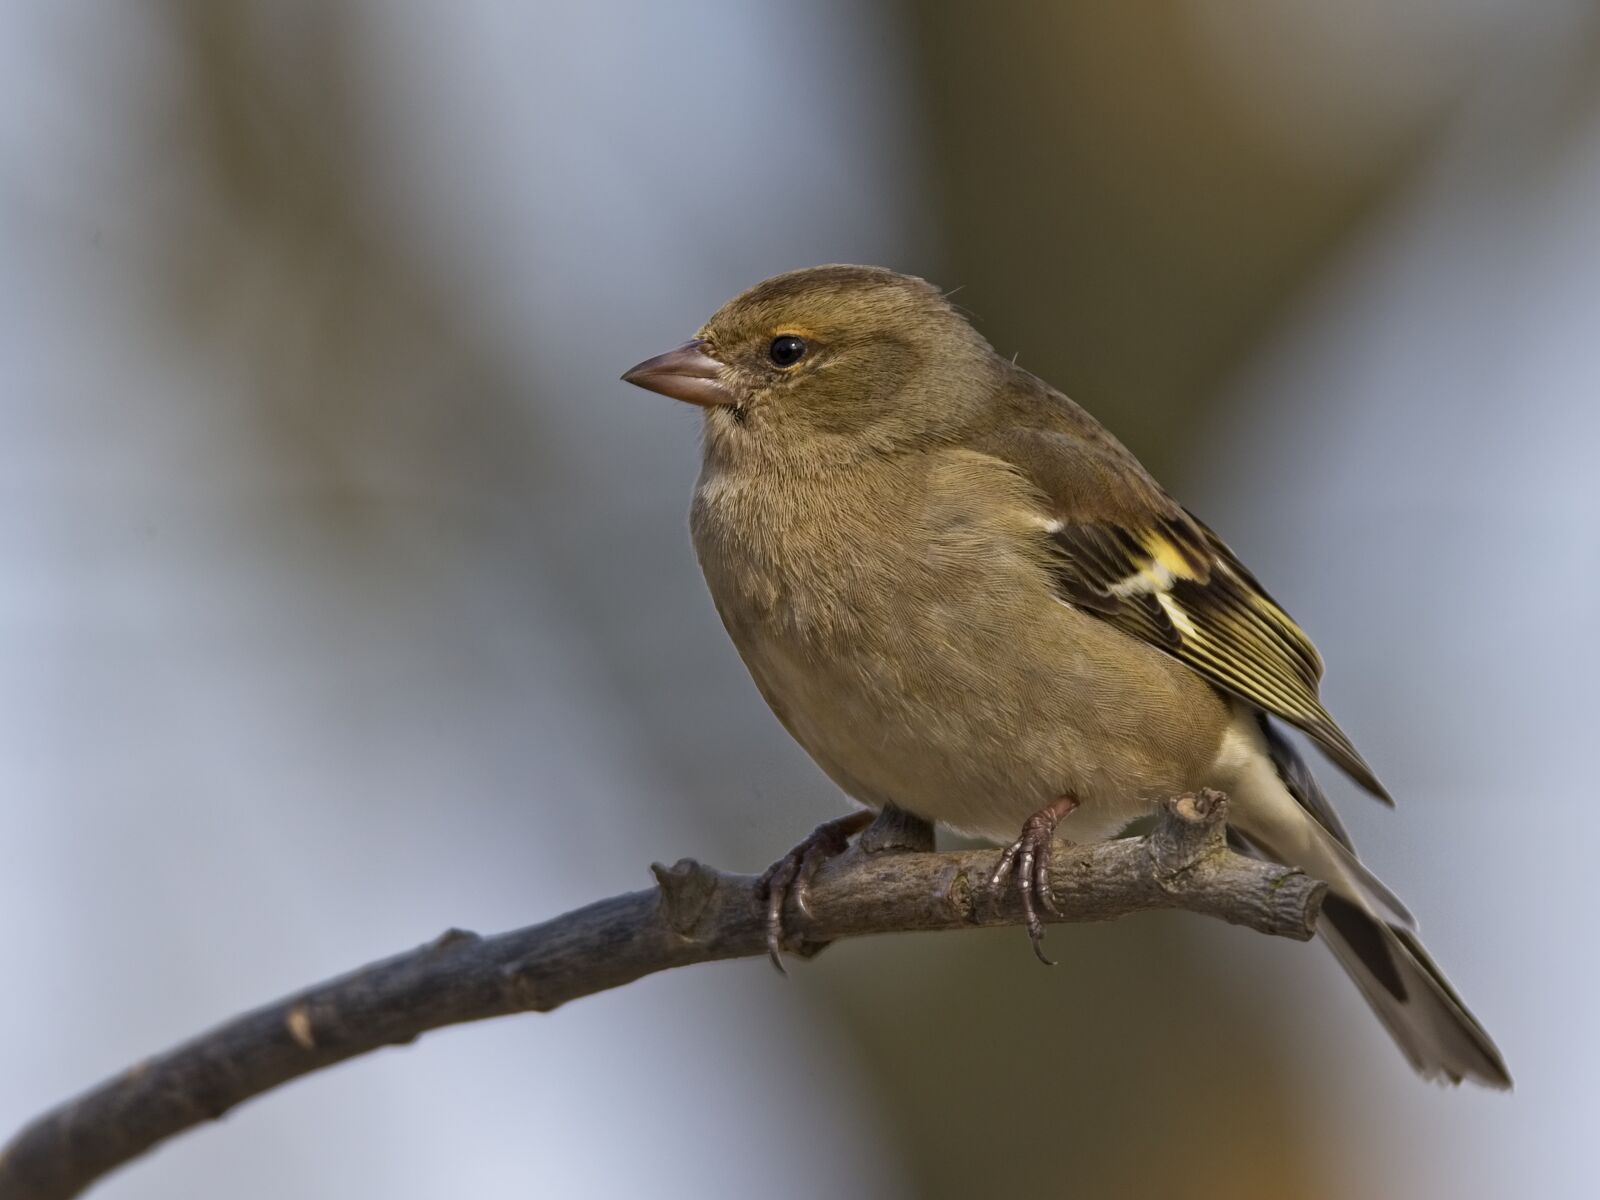 Sigma 150-600mm F5-6.3 DG OS HSM | C sample photo. Chaffinch females, chaffinch, fink photography